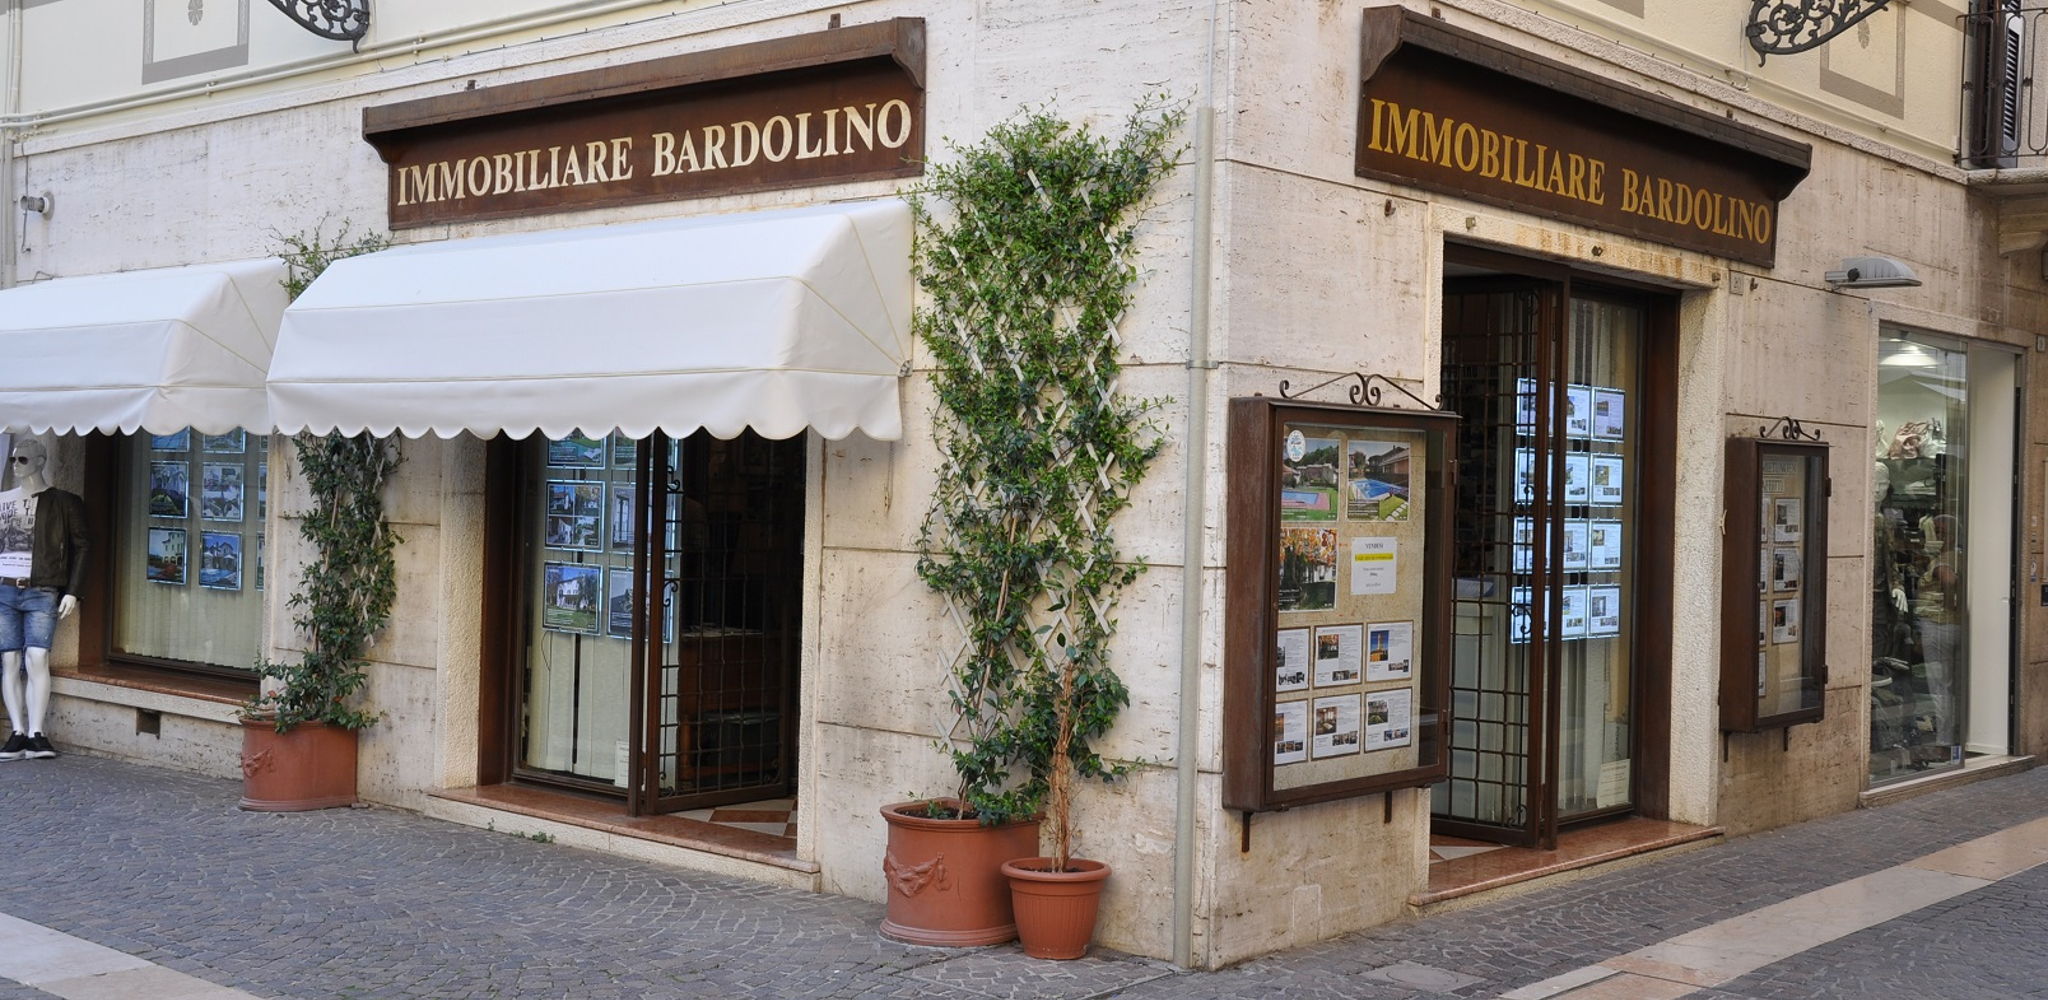 Location and offices of Immobiliare Bardolino